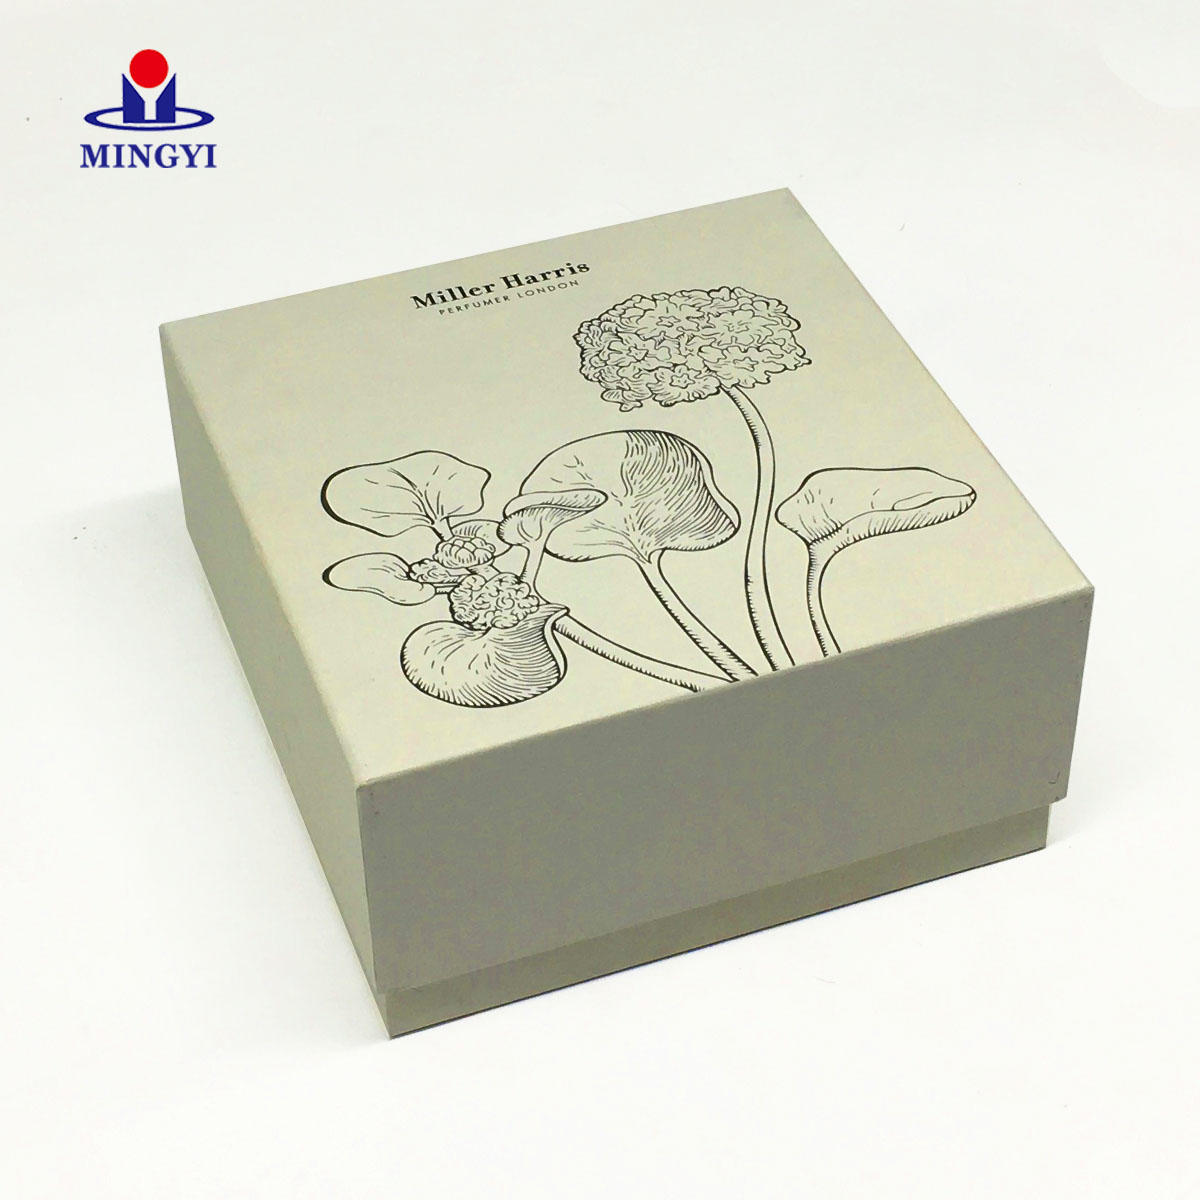 China supplier customized cardboard gift box with and base structrue used for digital